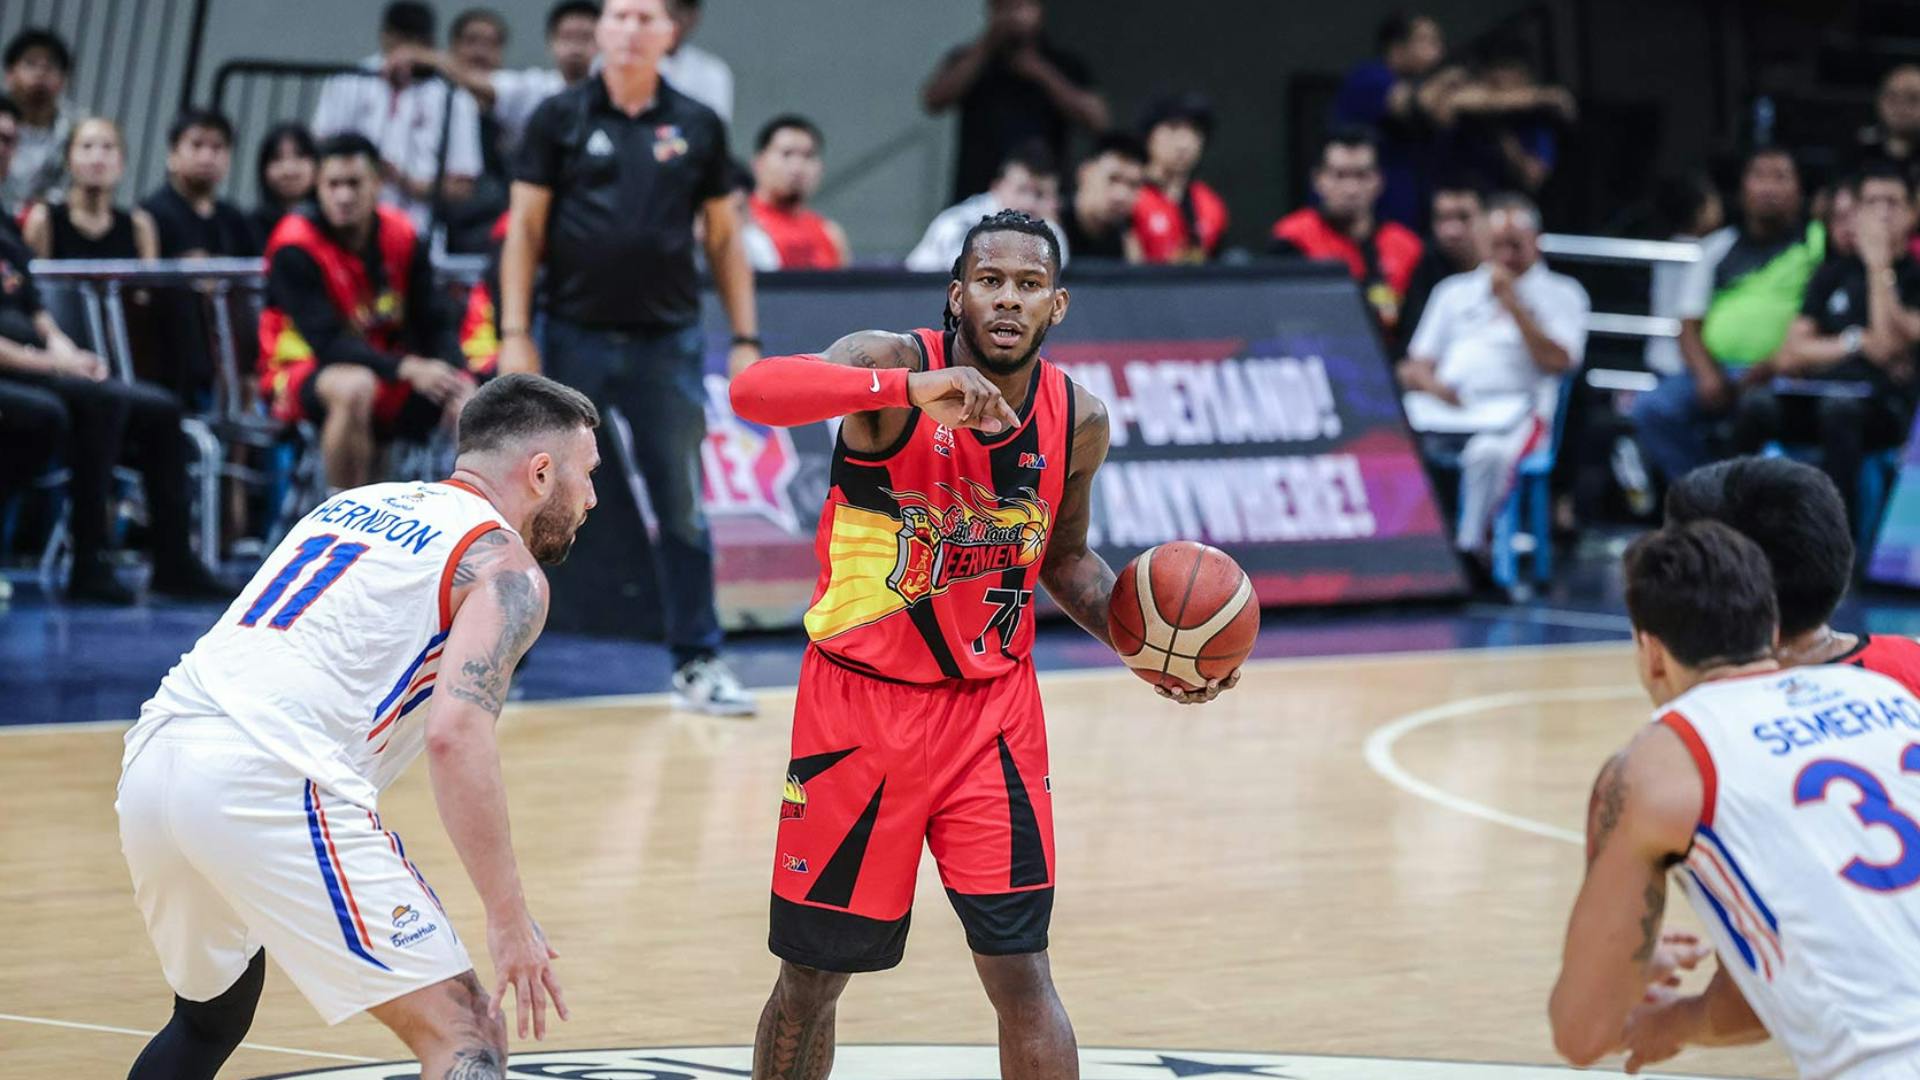 PBA: CJ Perez is Player of the Week after pushing Beermen closer to elims sweep